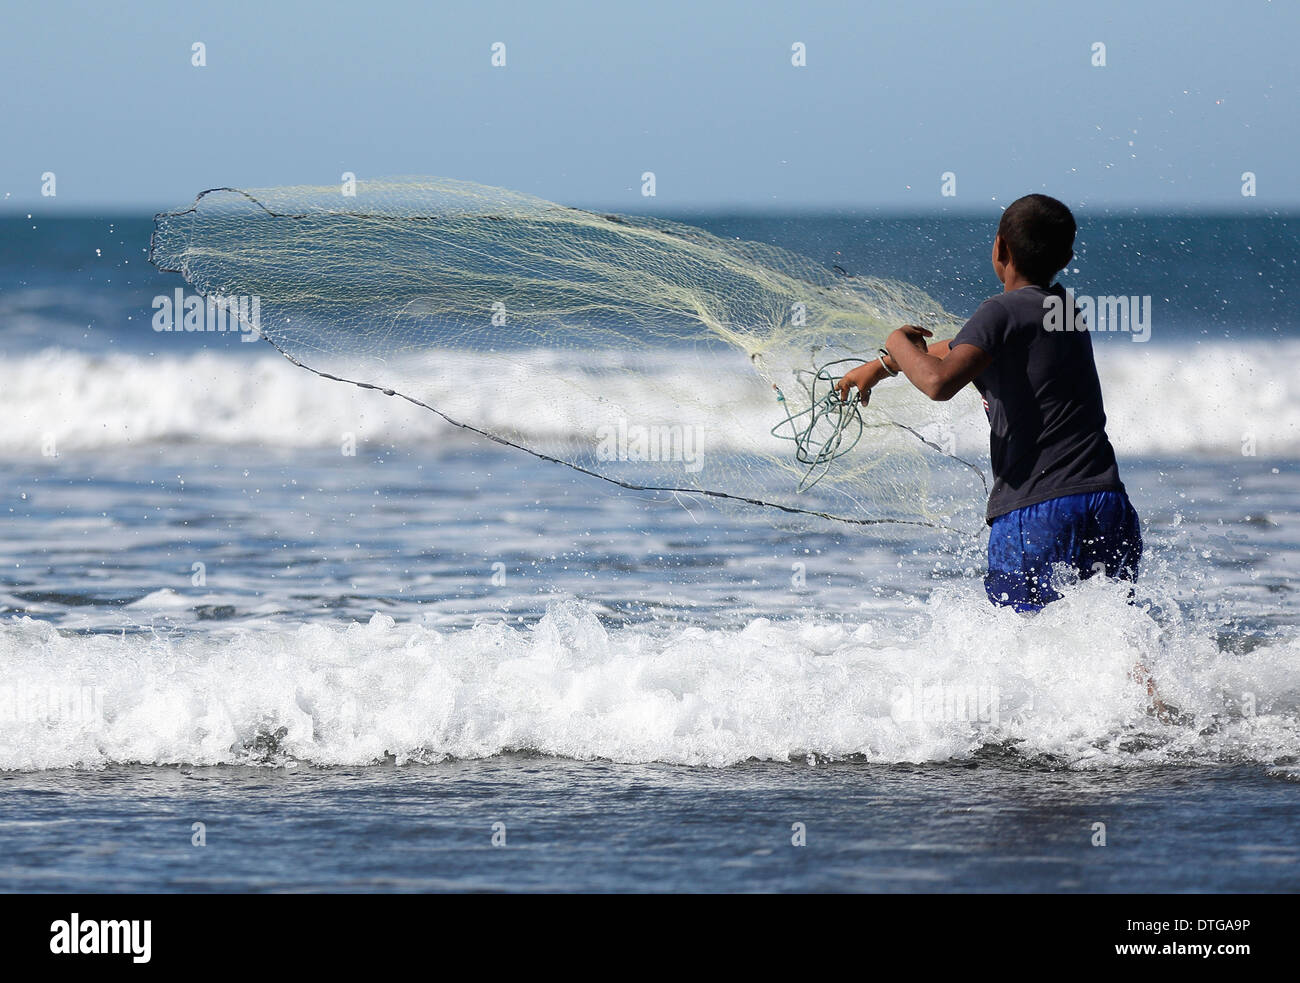 Boy casting net into the surf on the Pacific coast beach at Mechapa, Nicaragua Stock Photo